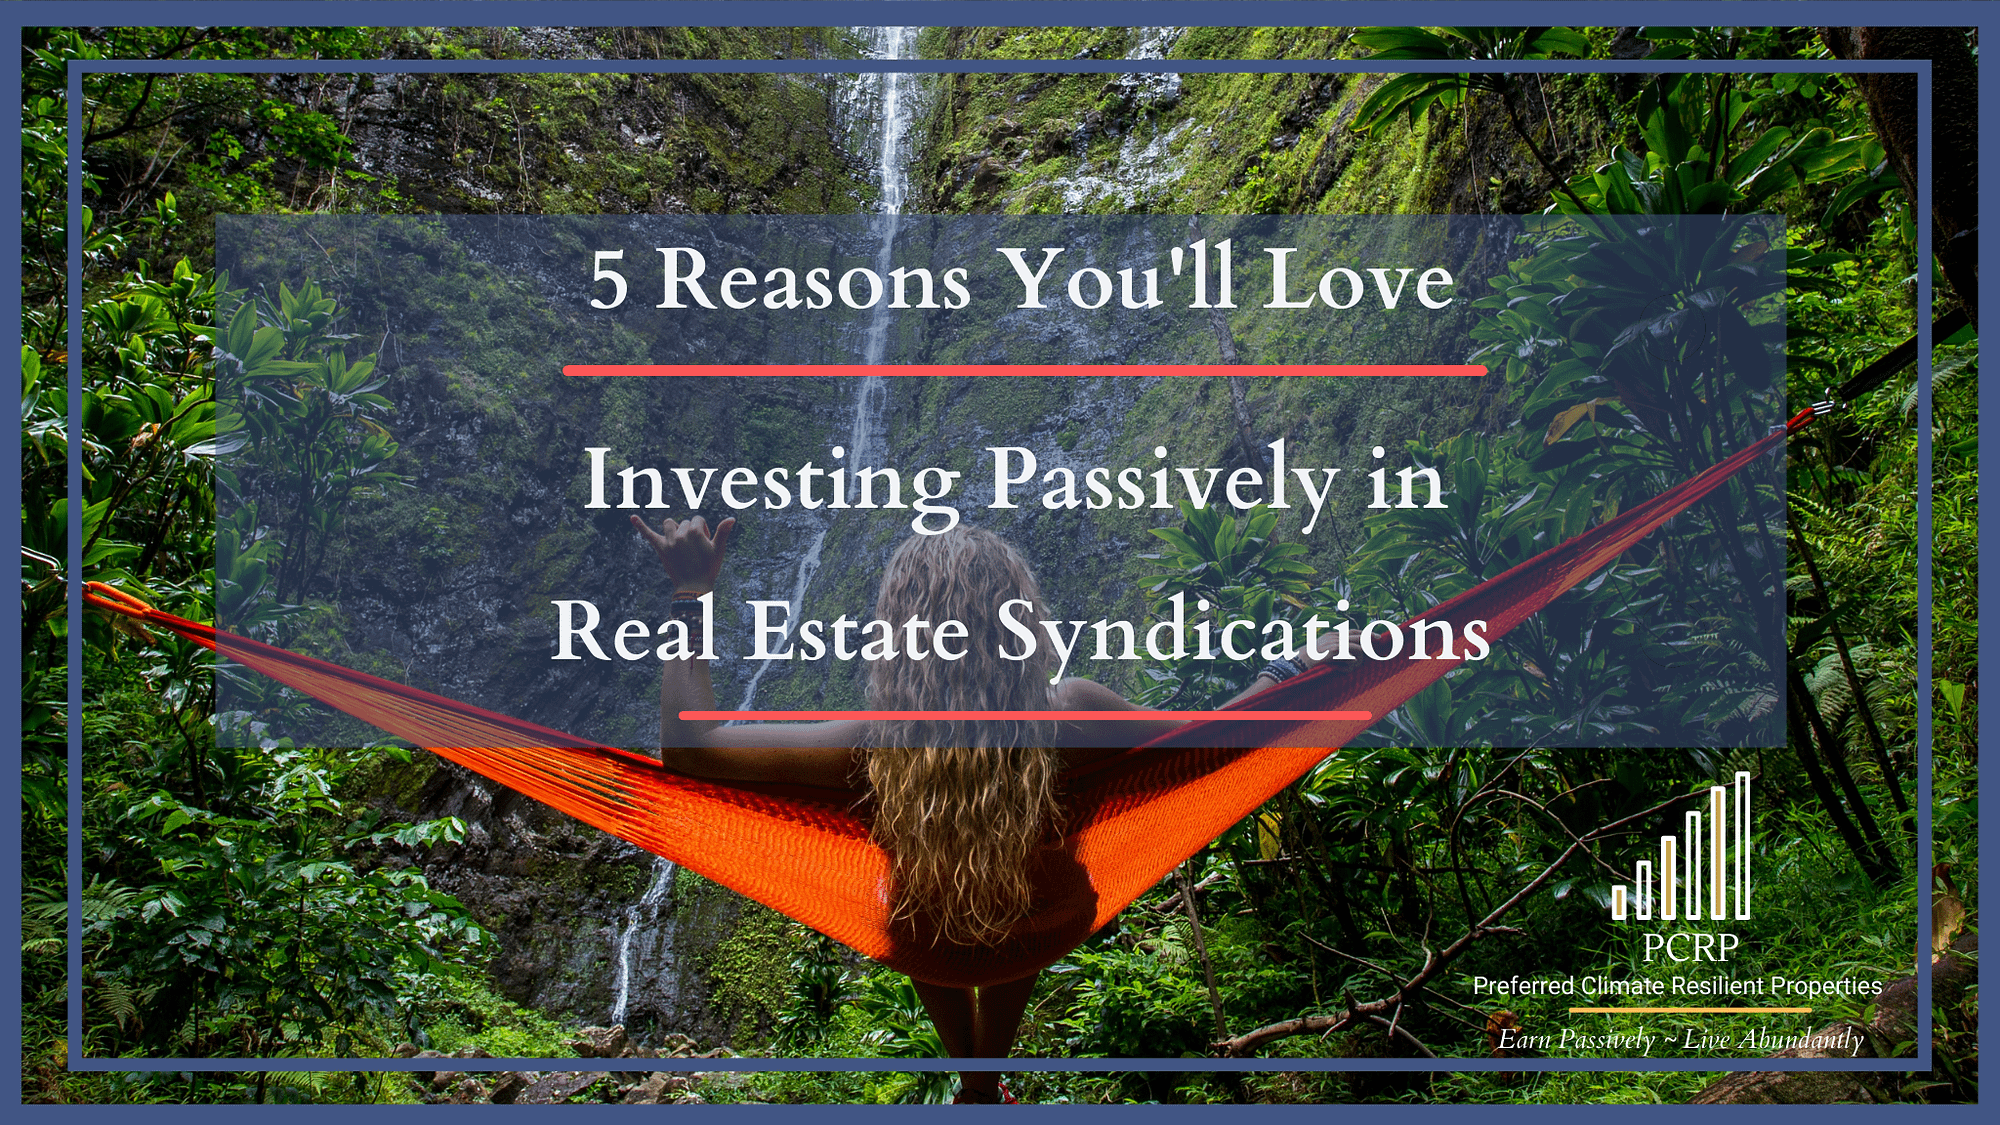 5 Reasons You'll Love investing passively in real estate syndications